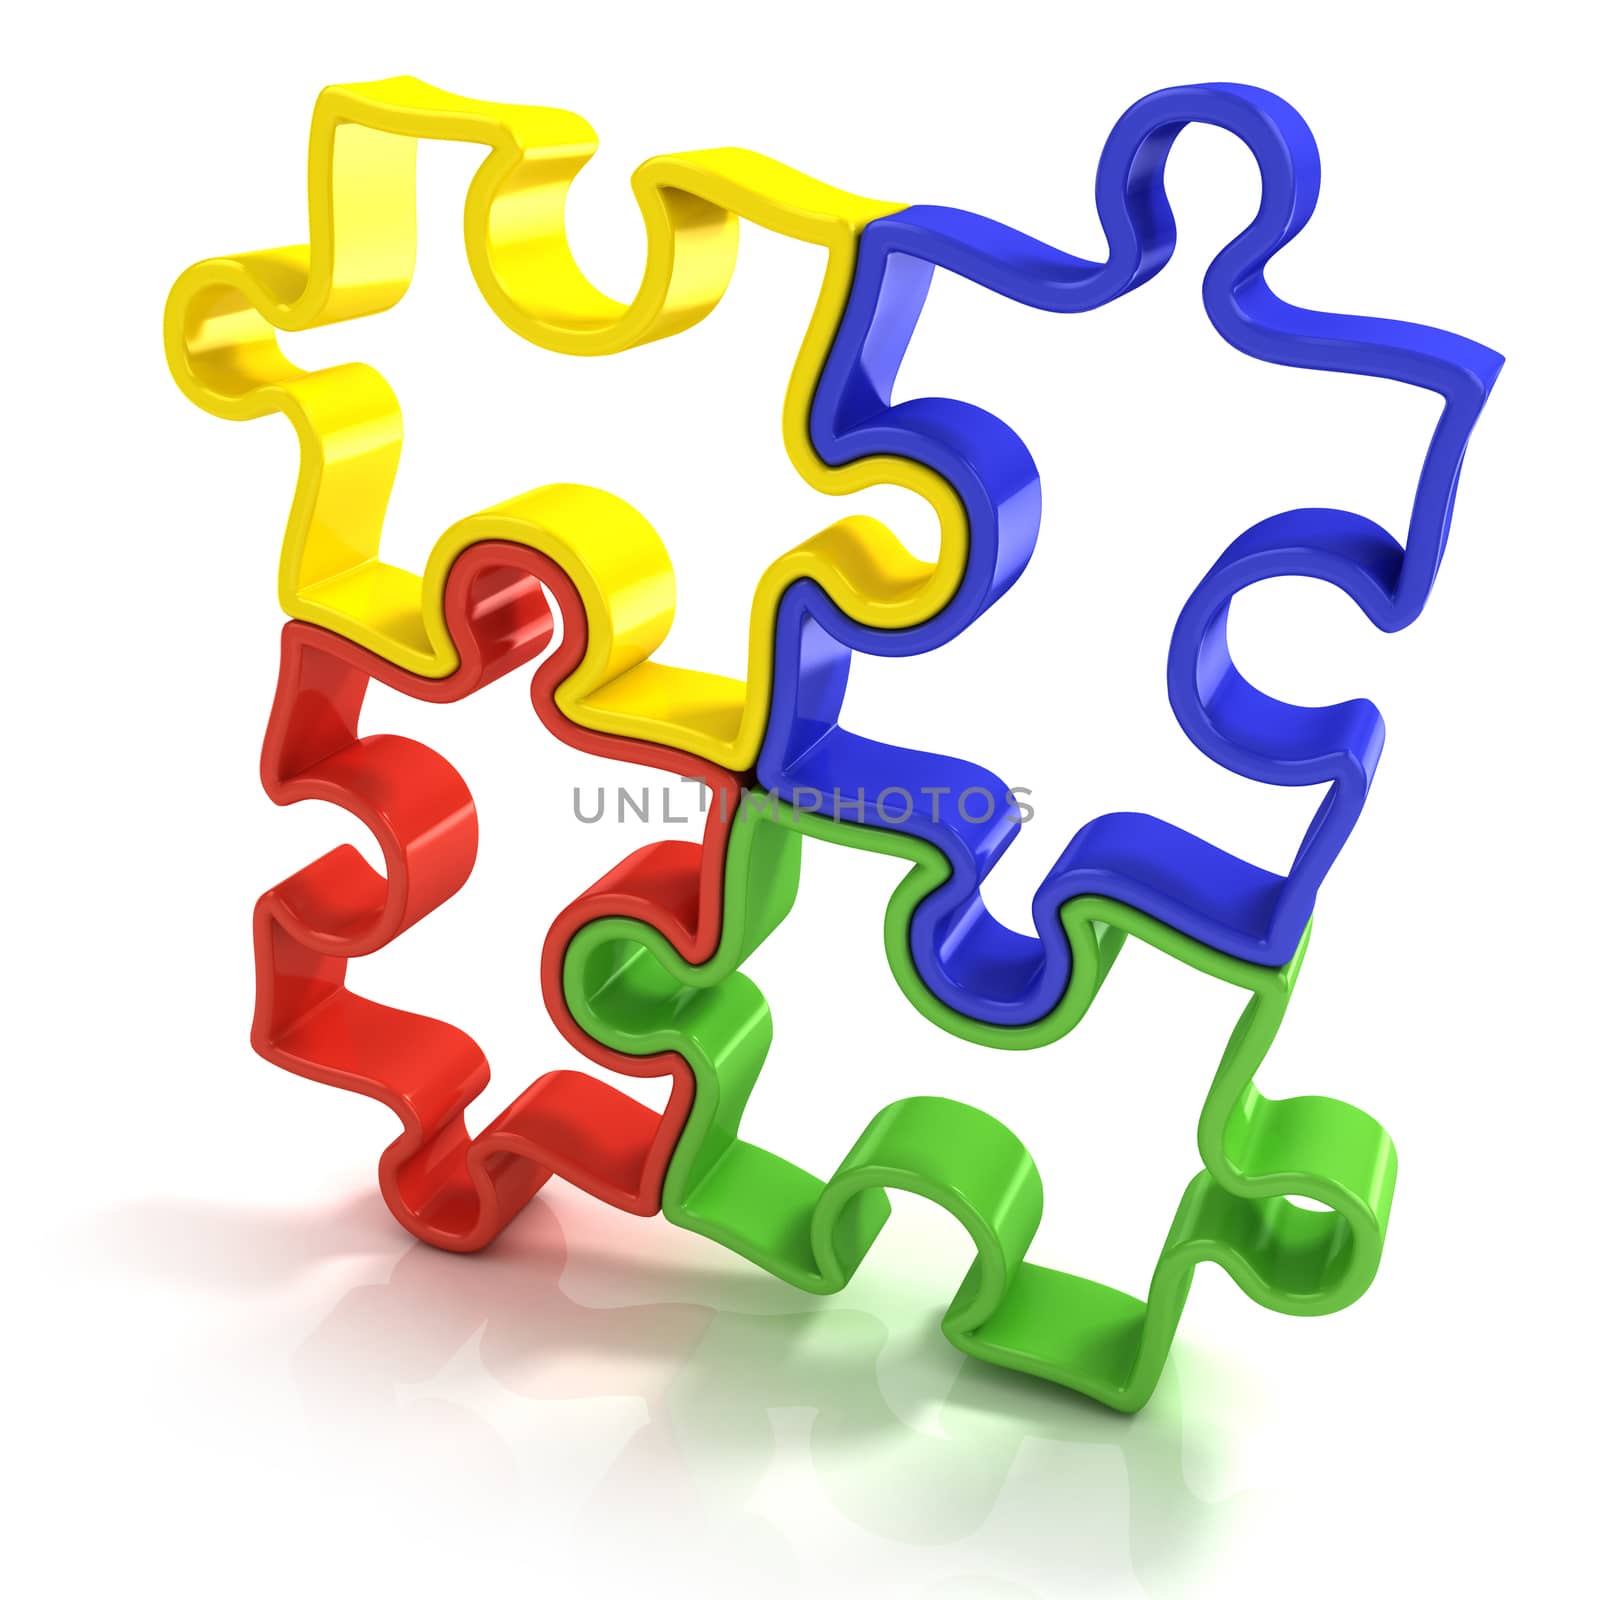 Four colorful outlined jigsaw puzzle pieces by djmilic